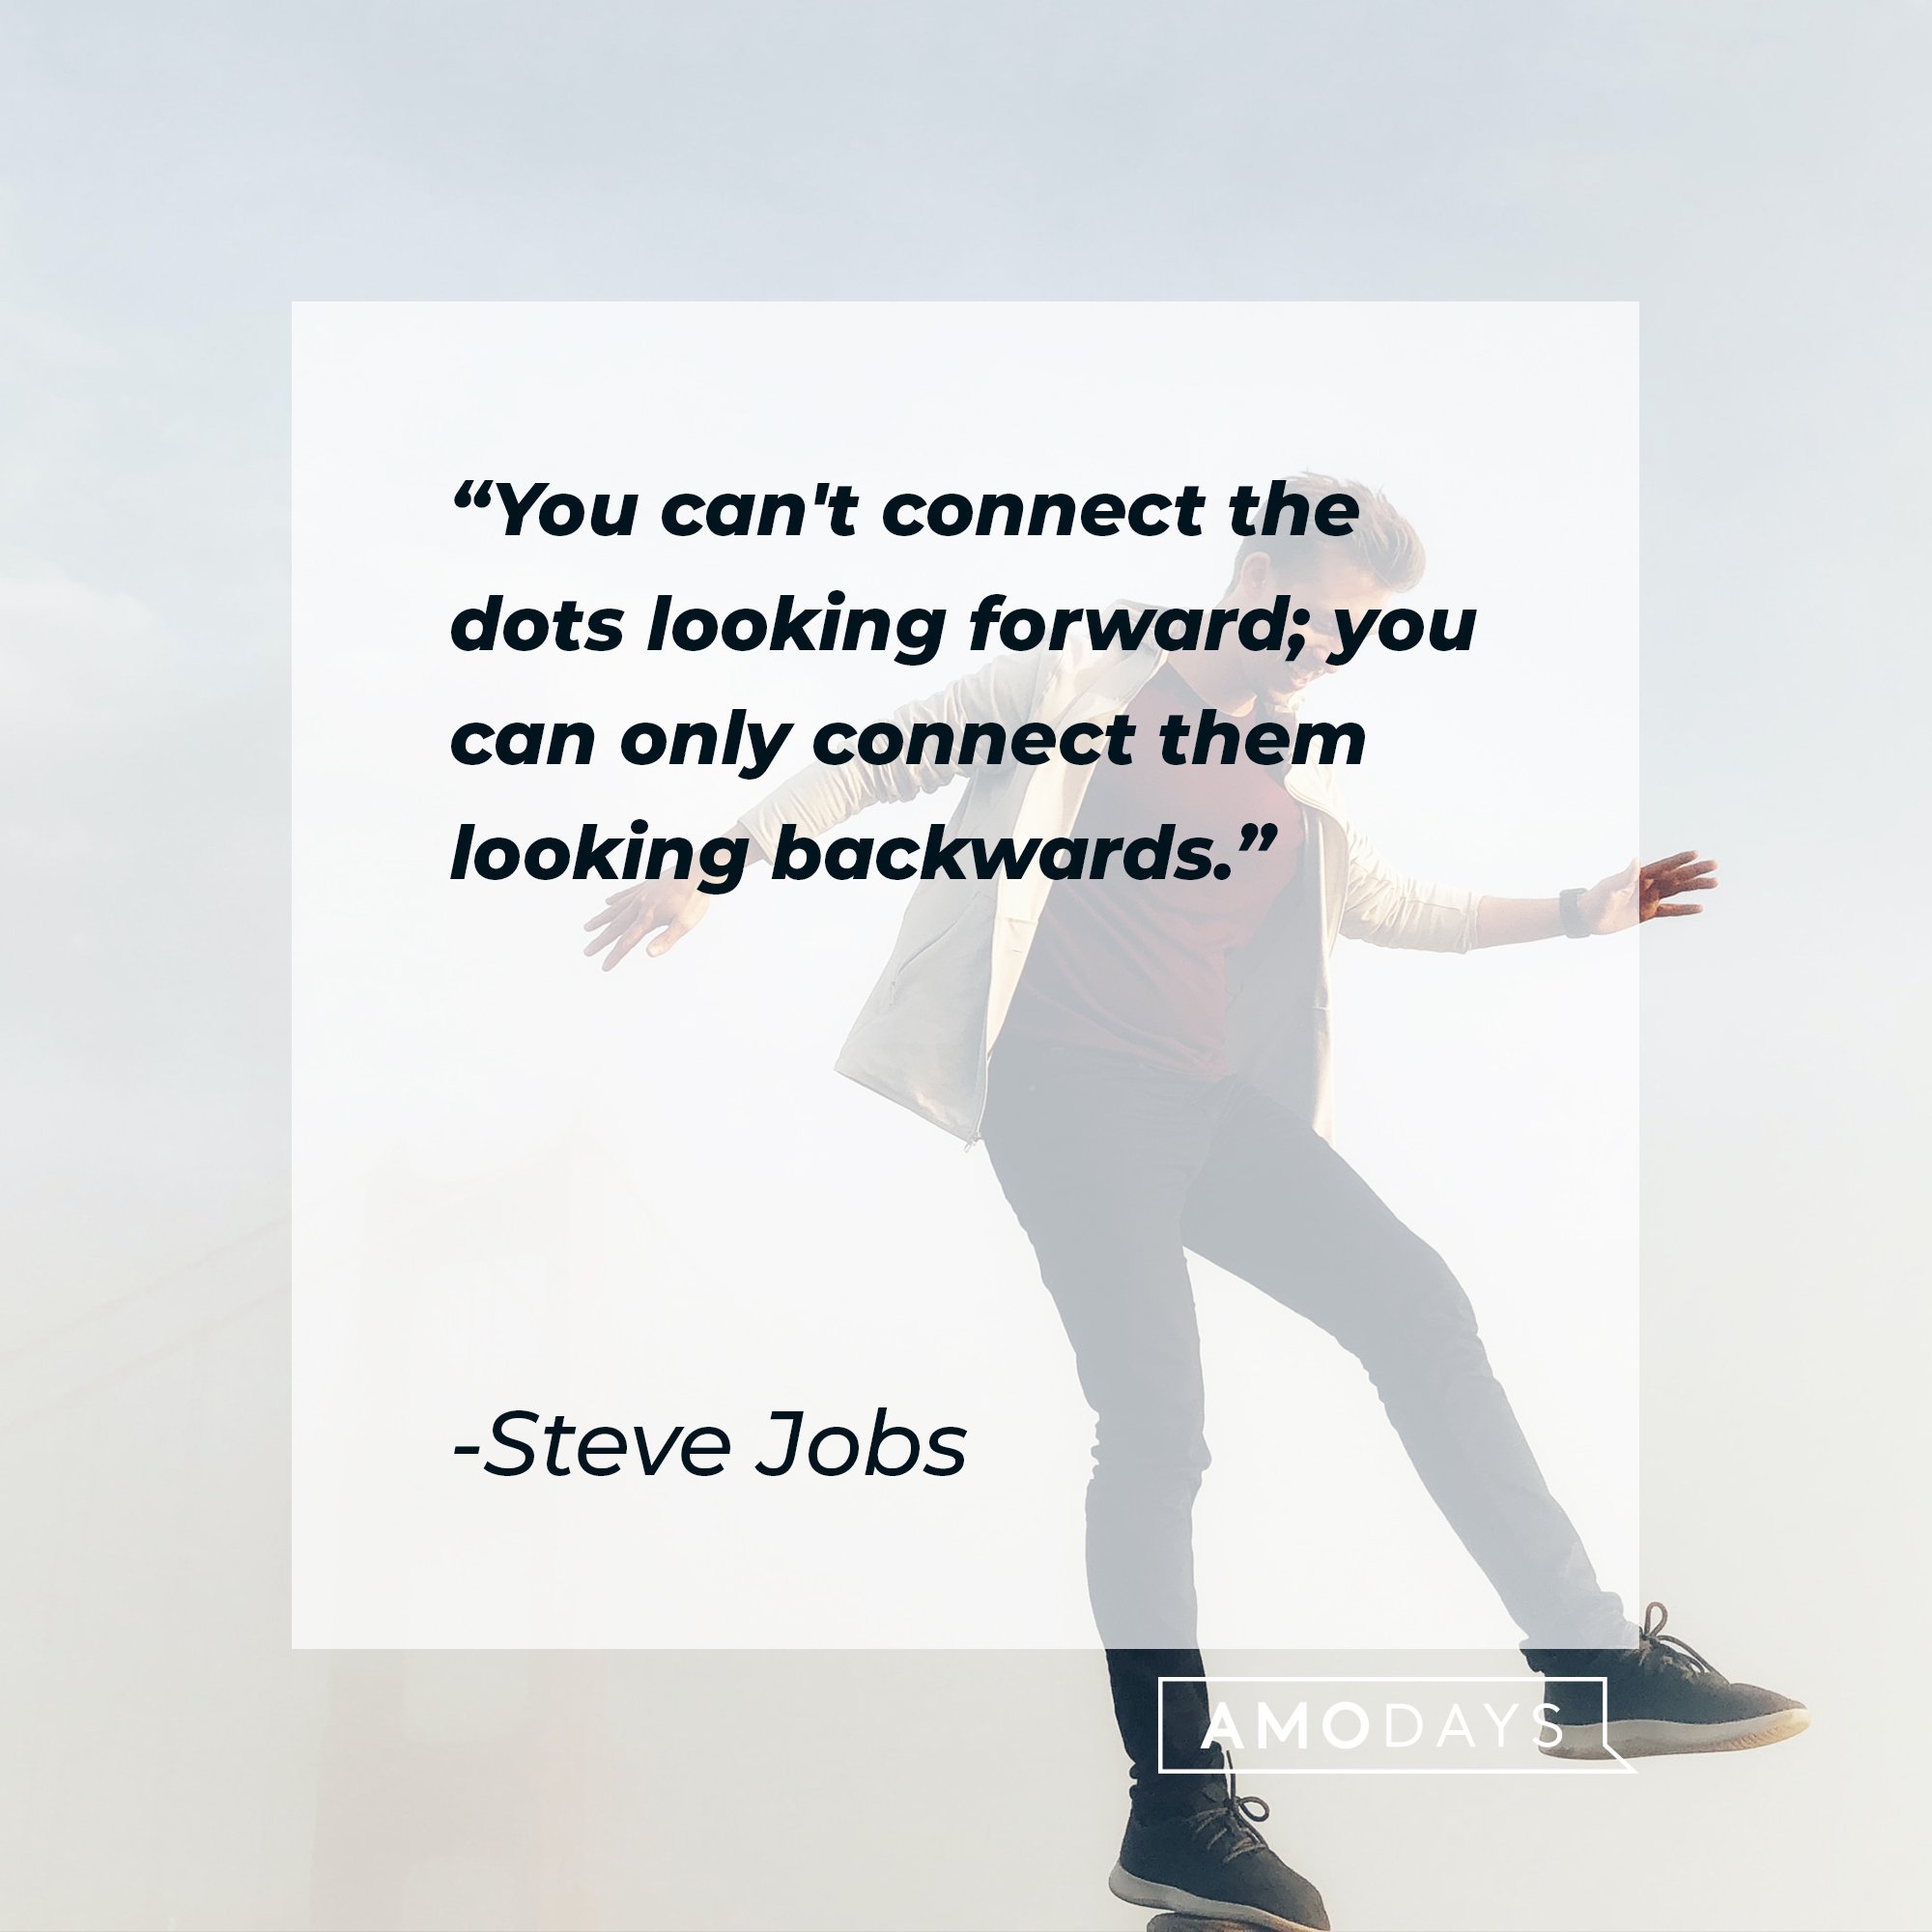  Steve Jobs’ quote: "You can't connect the dots looking forward; you can only connect them looking backwards." | Image: AmoDays